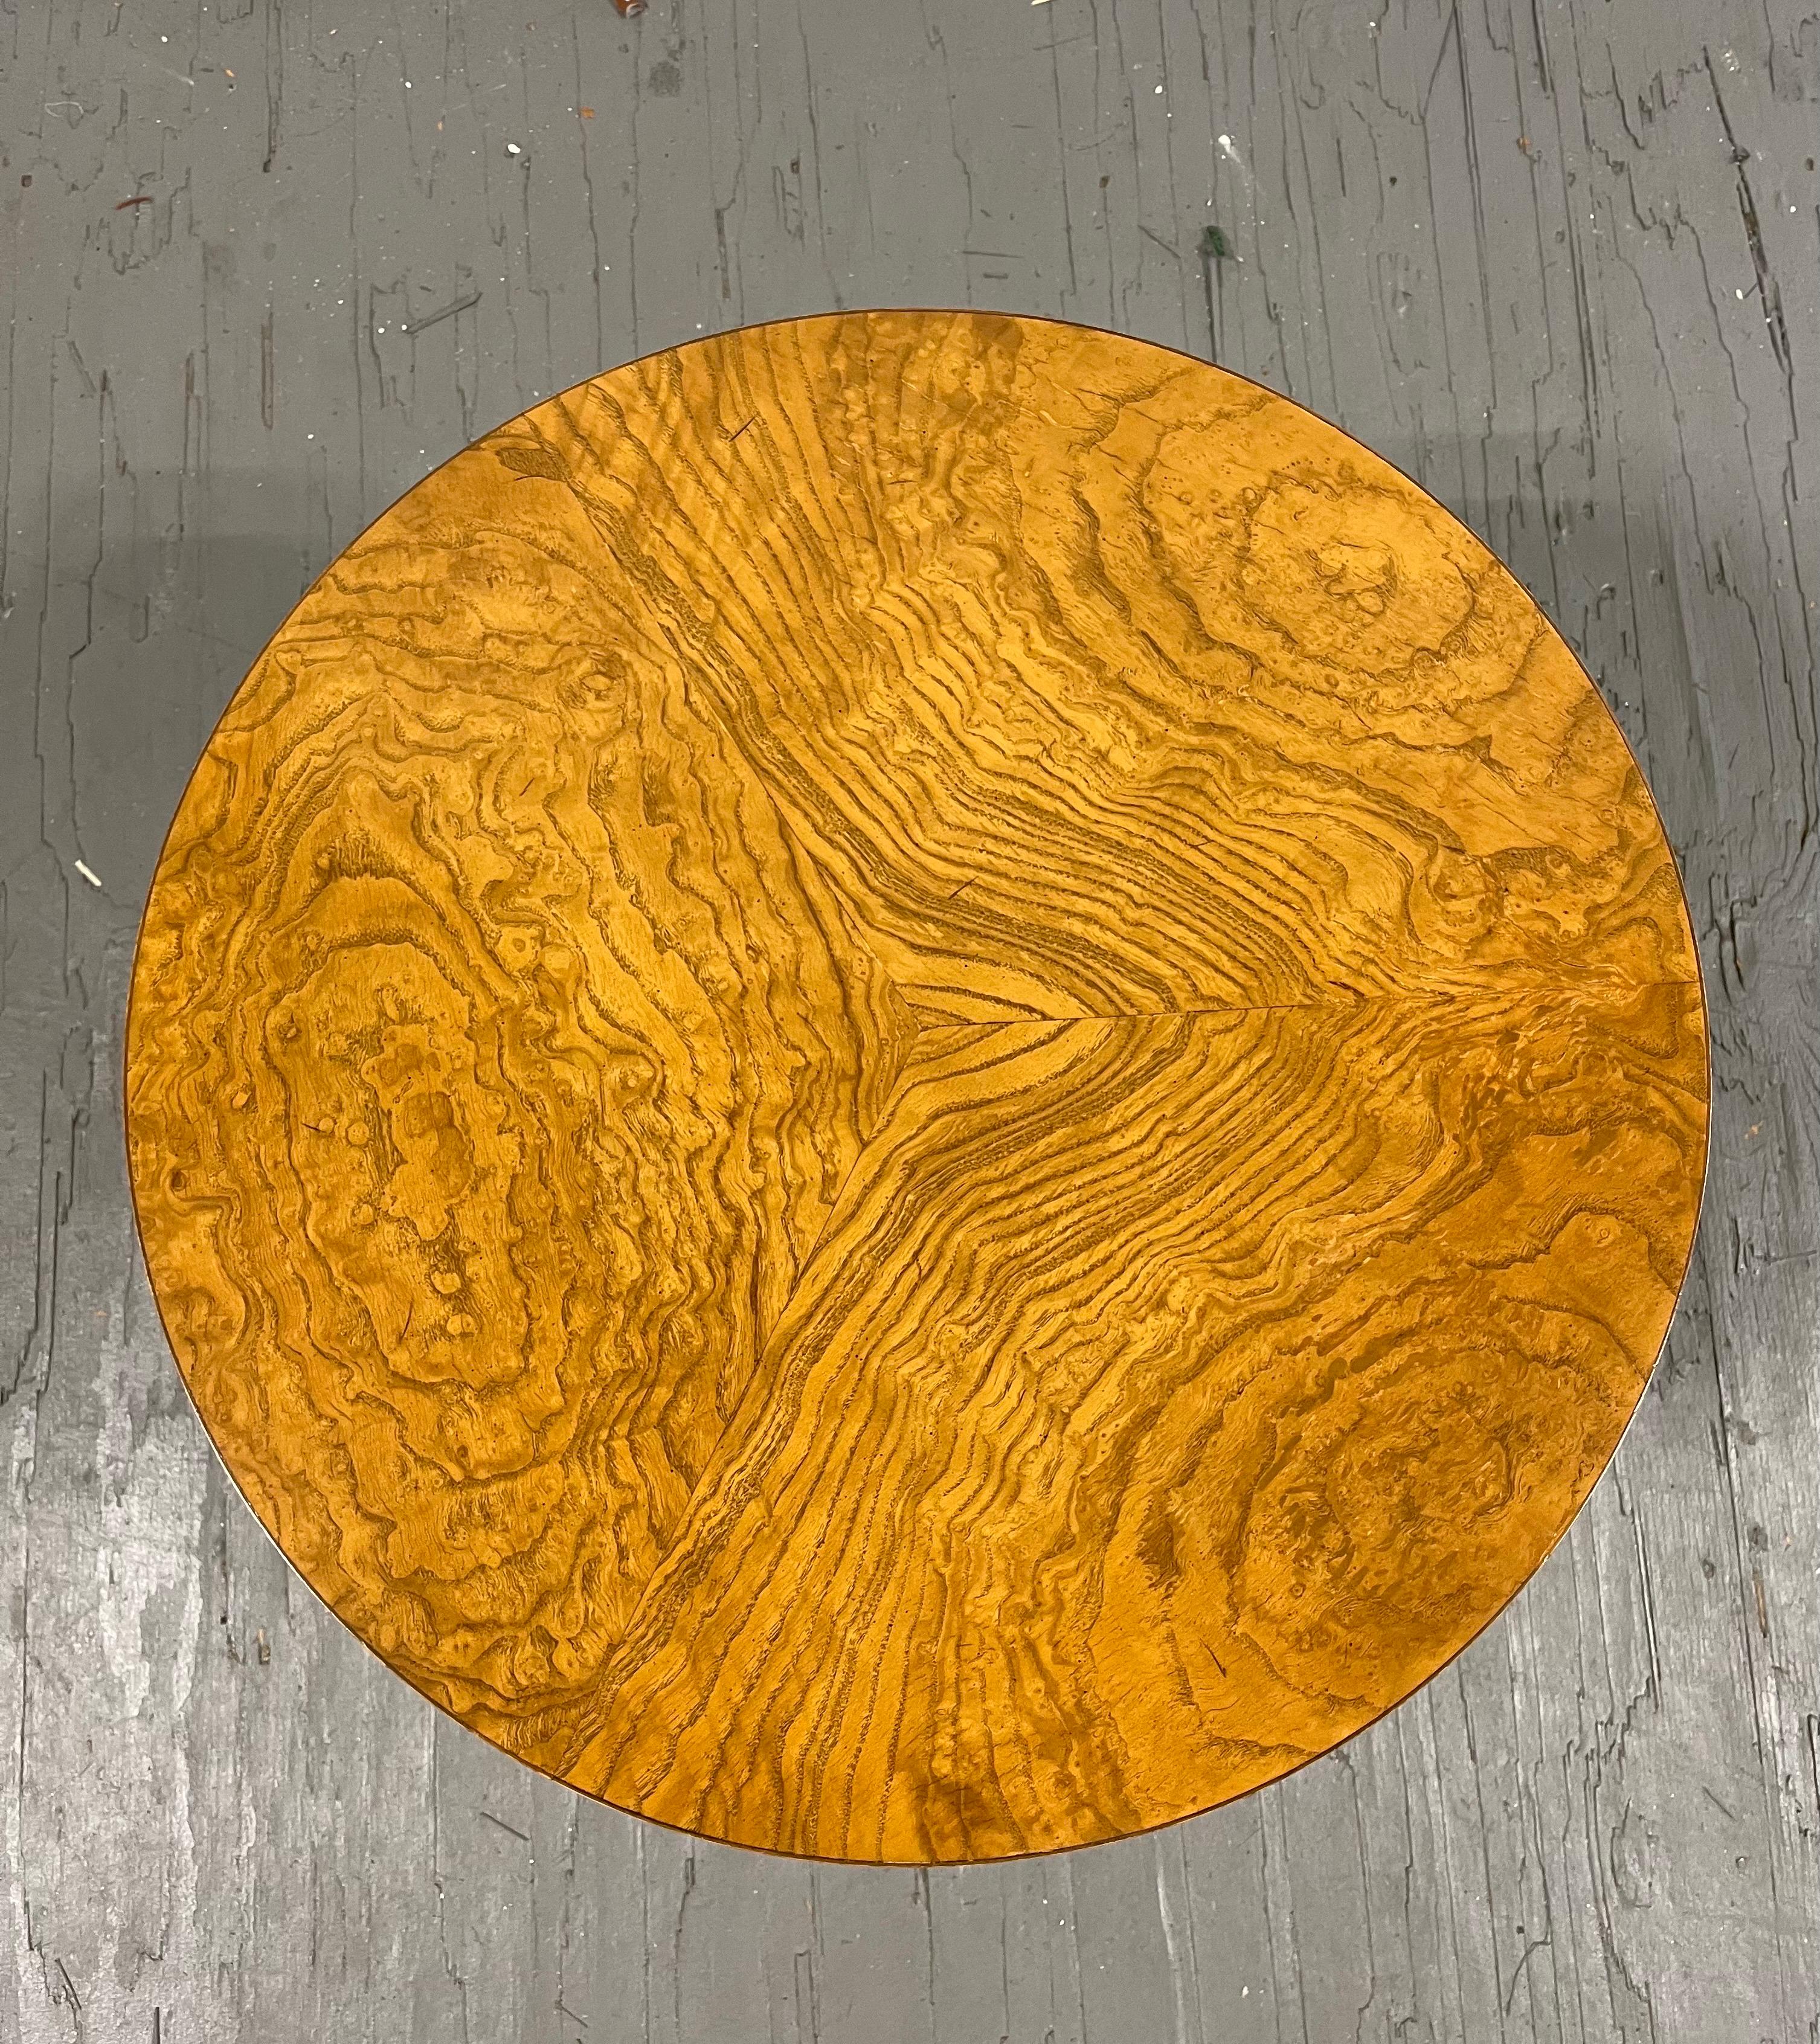 Neoclassical Pavane by Tomlinson Burl Table For Sale